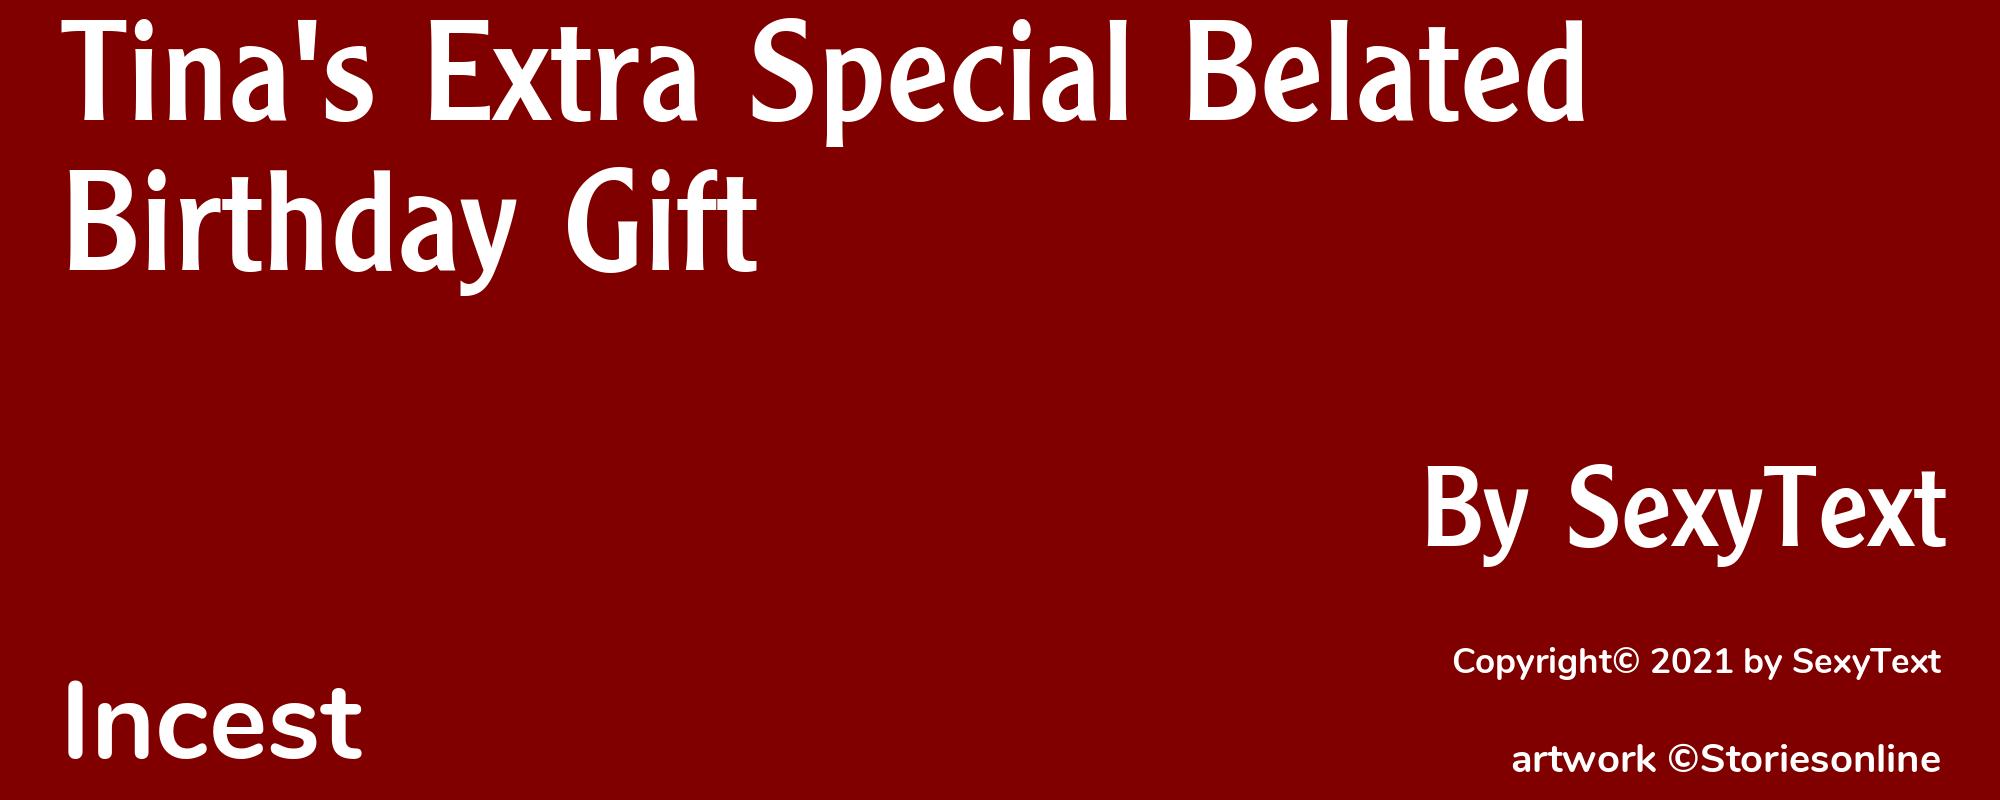 Tina's Extra Special Belated Birthday Gift - Cover